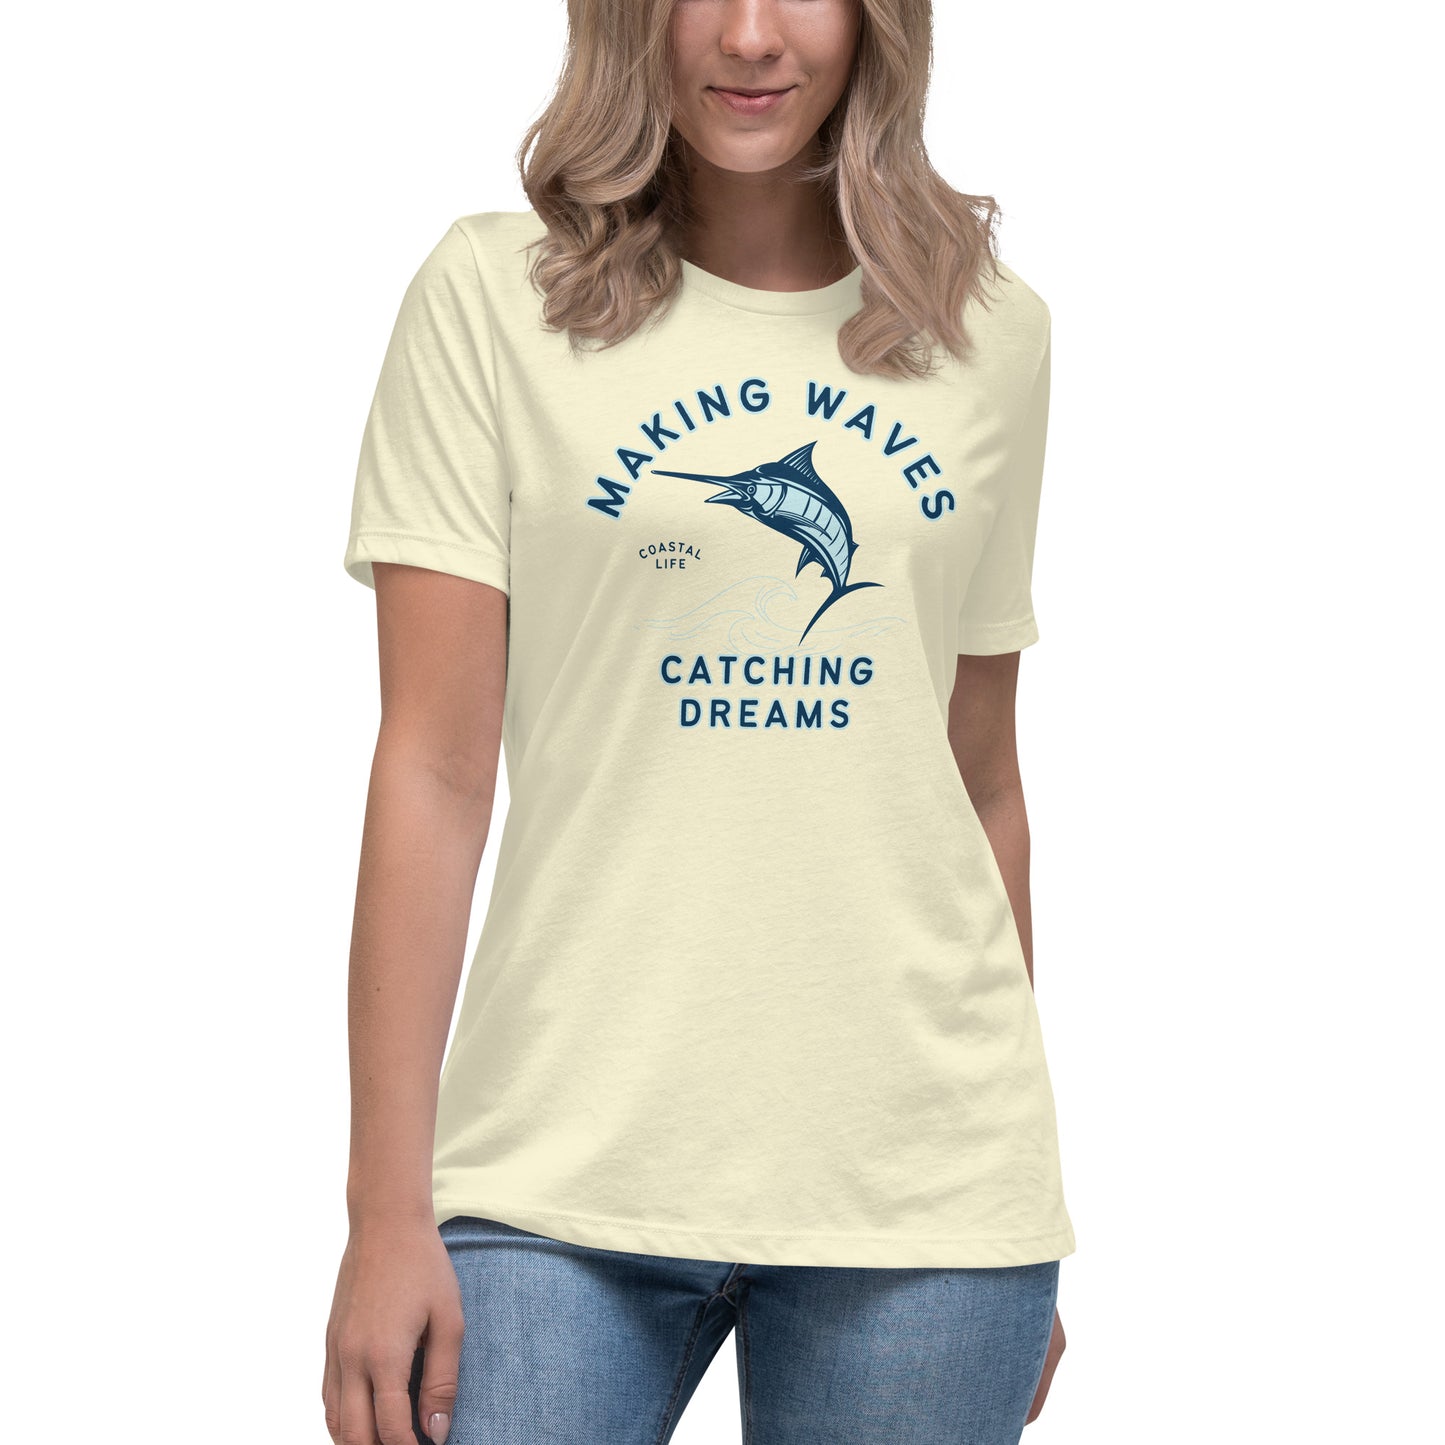 Making Waves Catching Dreams Women's Relaxed T-Shirt